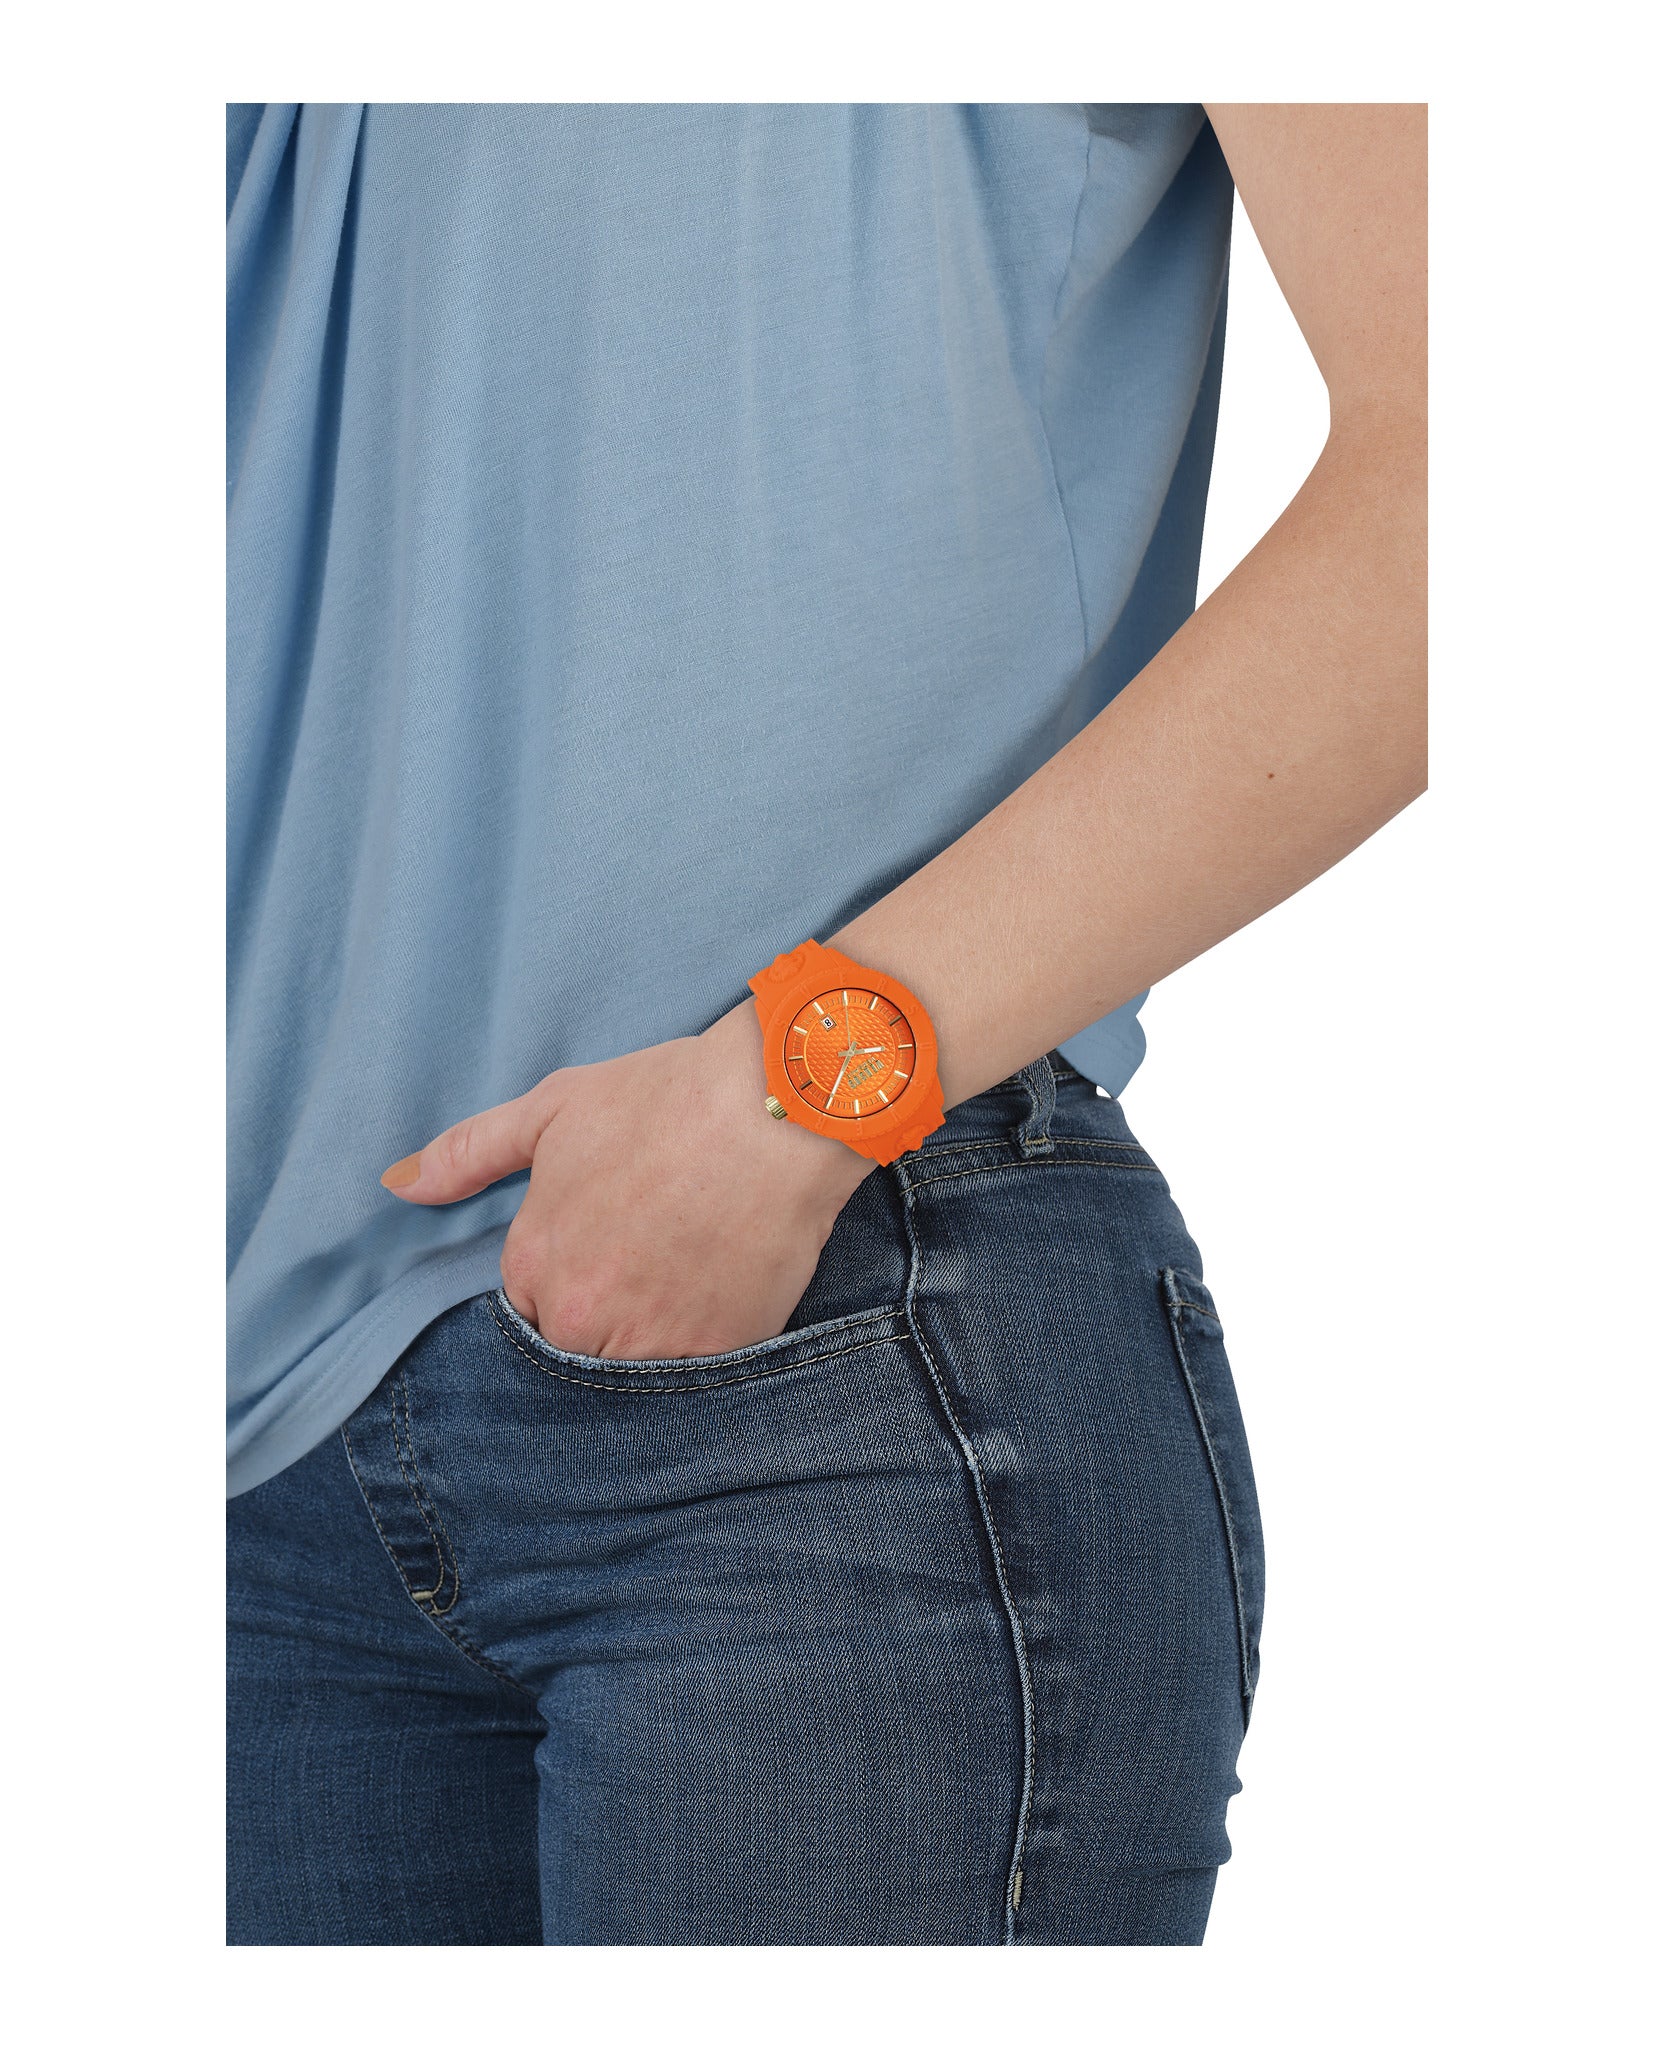 Tokyo Silicone Watch